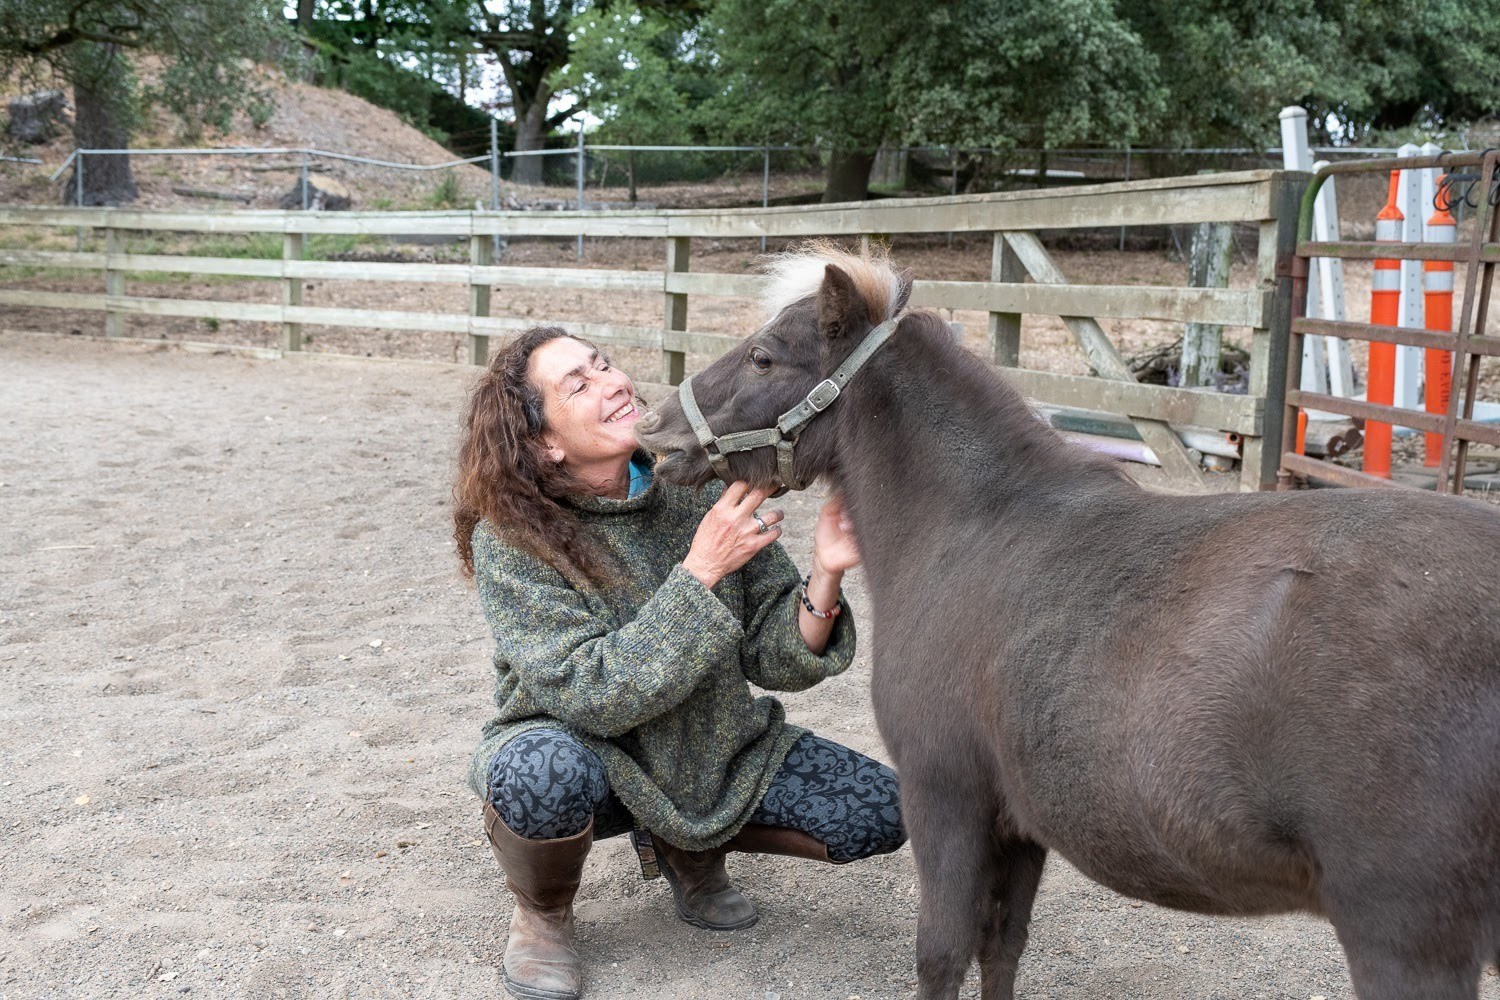 A woman with long, wavy brown hair in a green sweater, blue tights, and brown boots squats down to pet the face of a small brown horse in a paddock